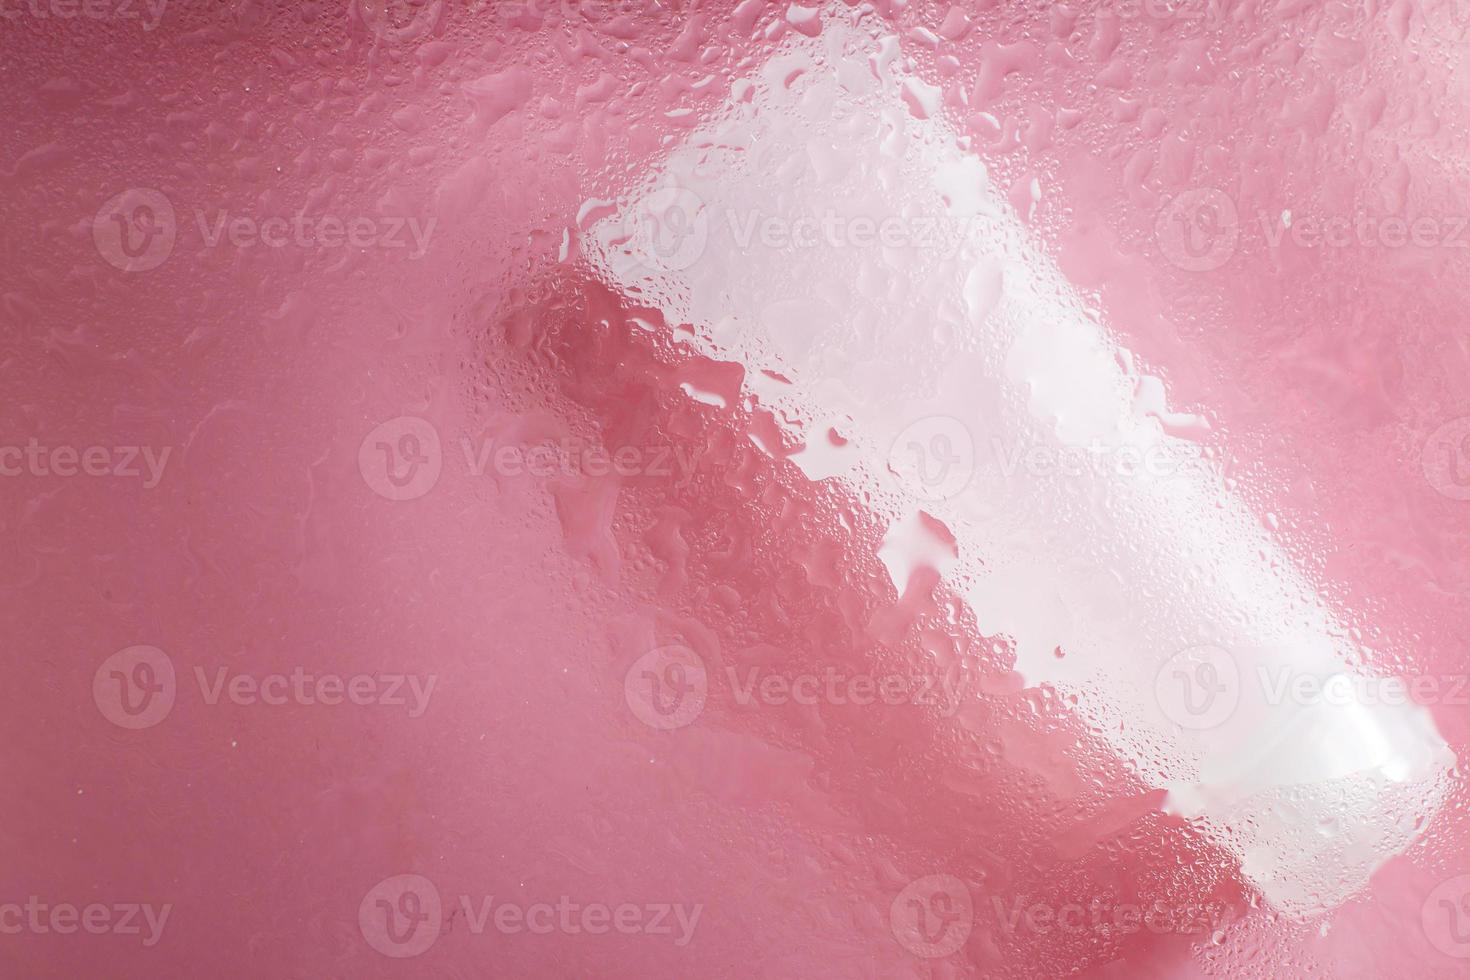 moisturizing skin care products. Face and hand cream under a glass surface with water on a pink background. spa cosmetic photo